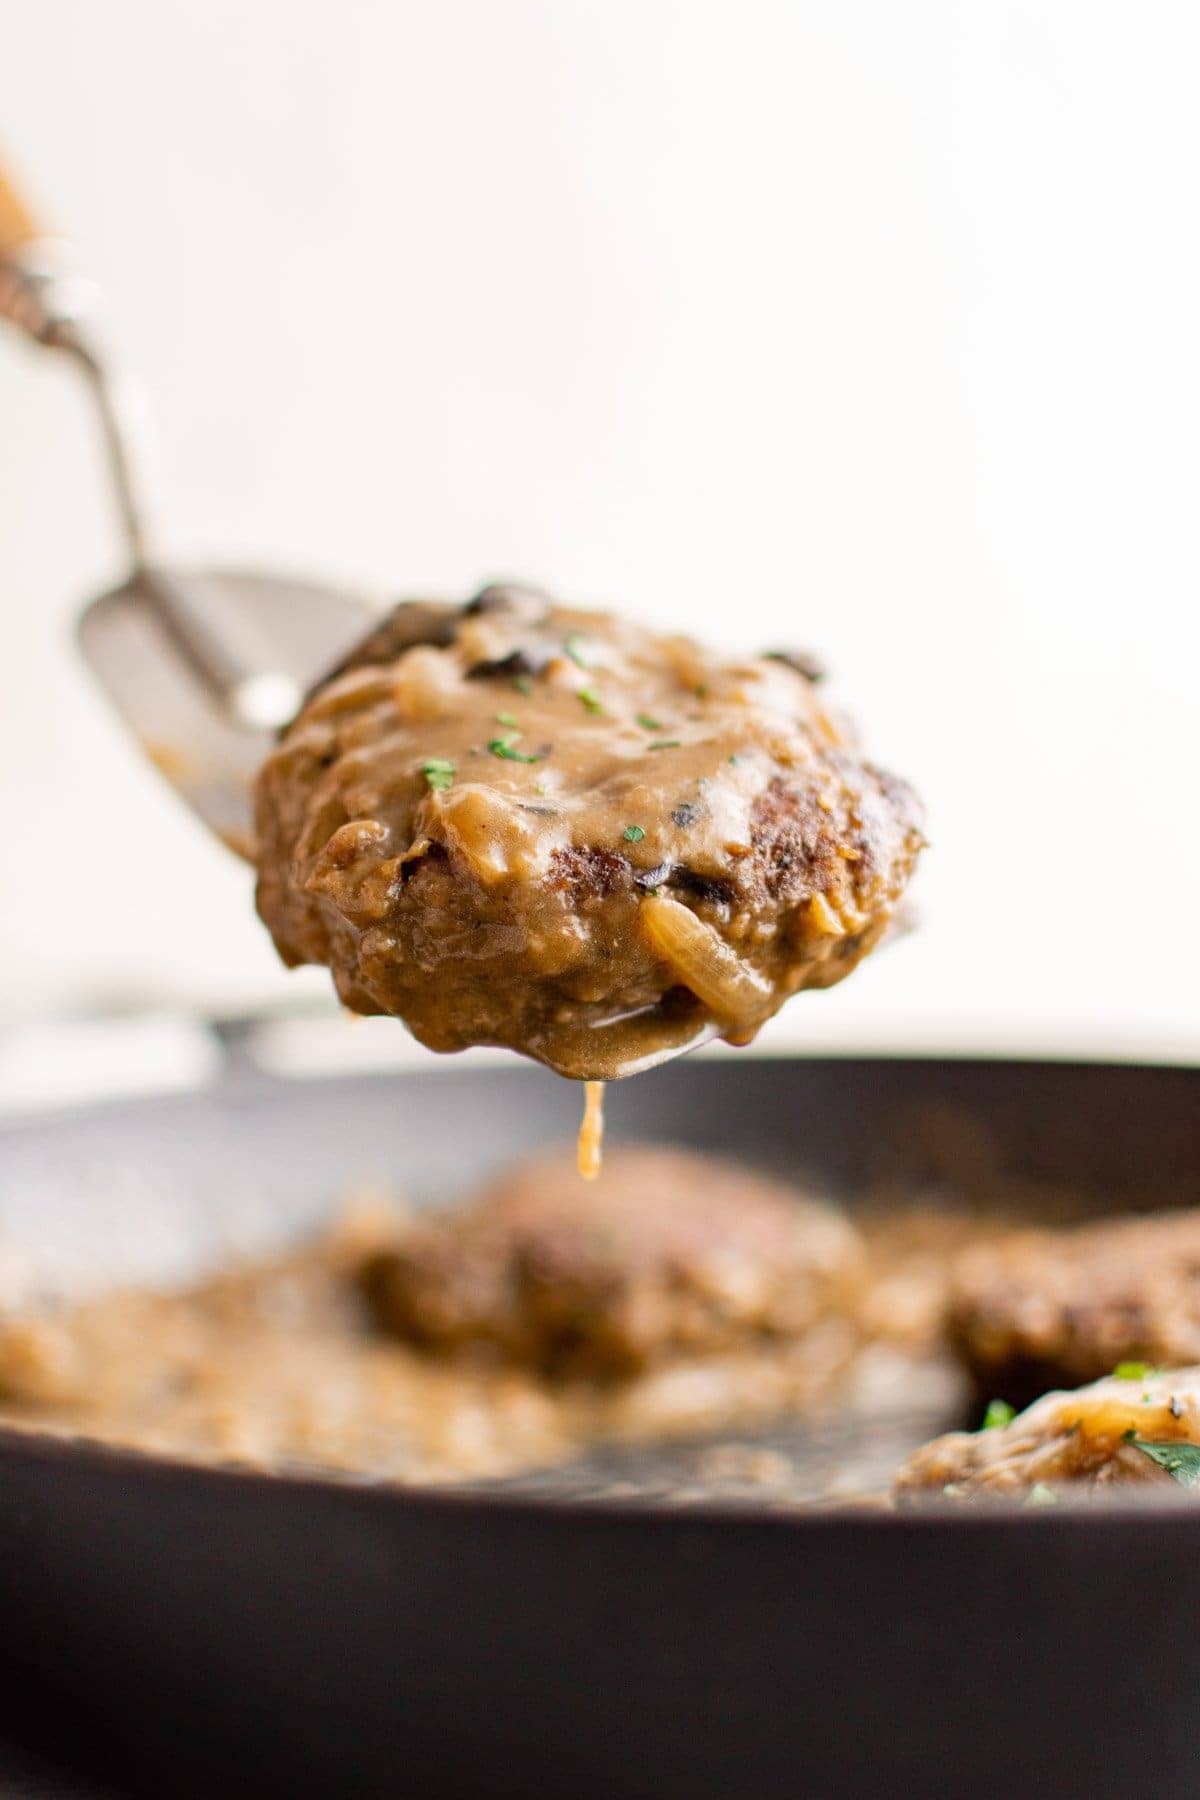 Chopped Steaks and Gravy - Ground Beef Recipes